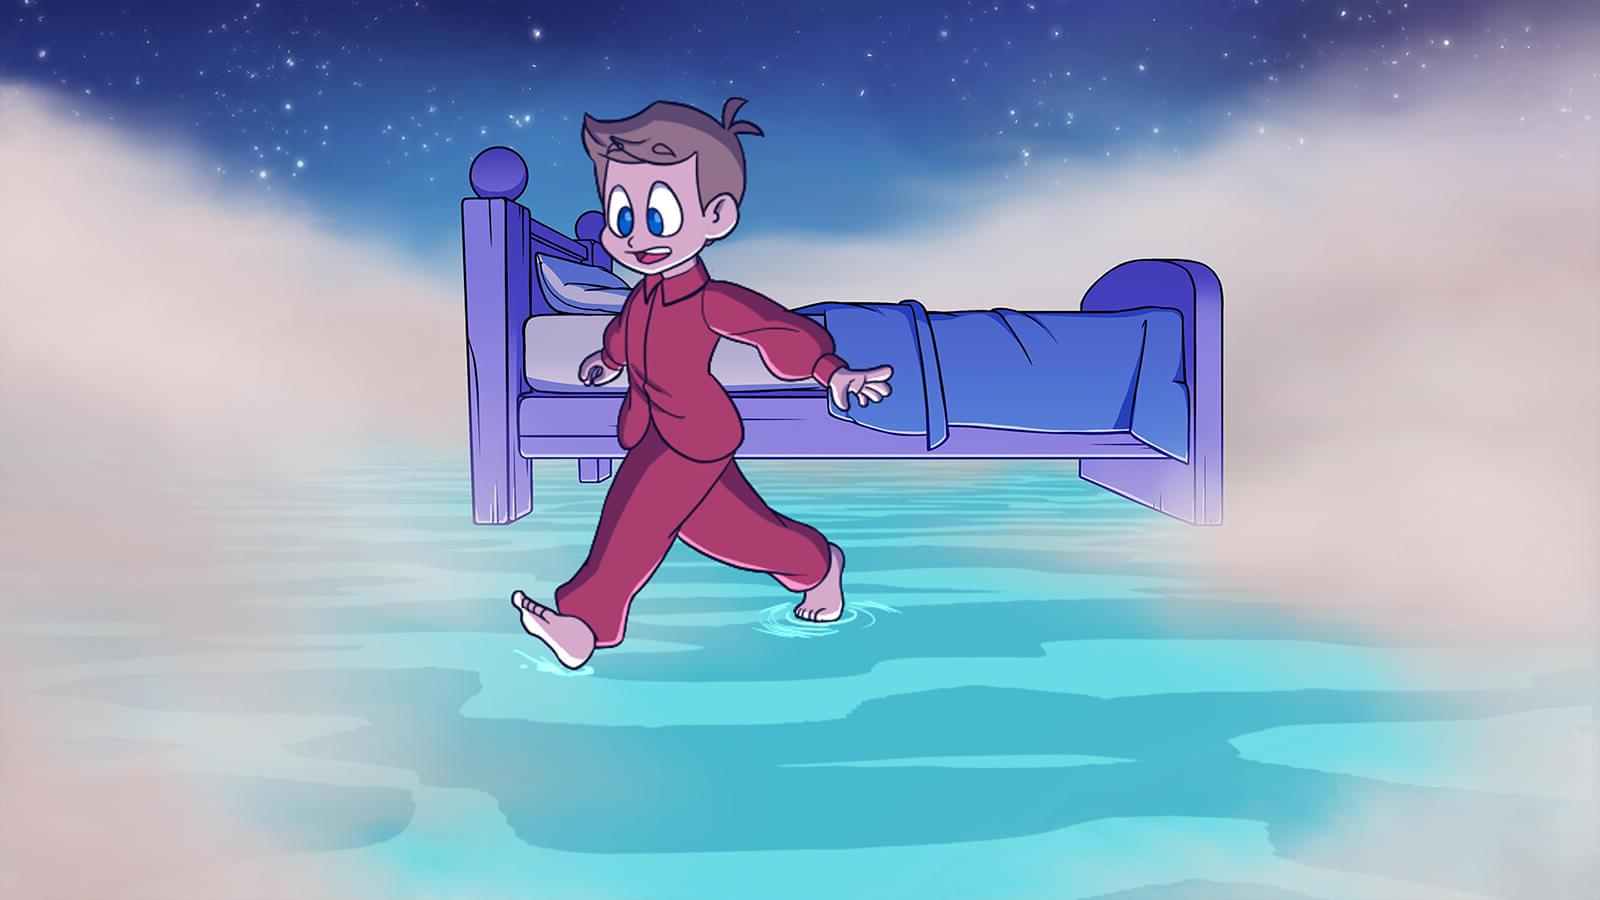 A boy steps out of bed onto a seemingly solid surface made of water.